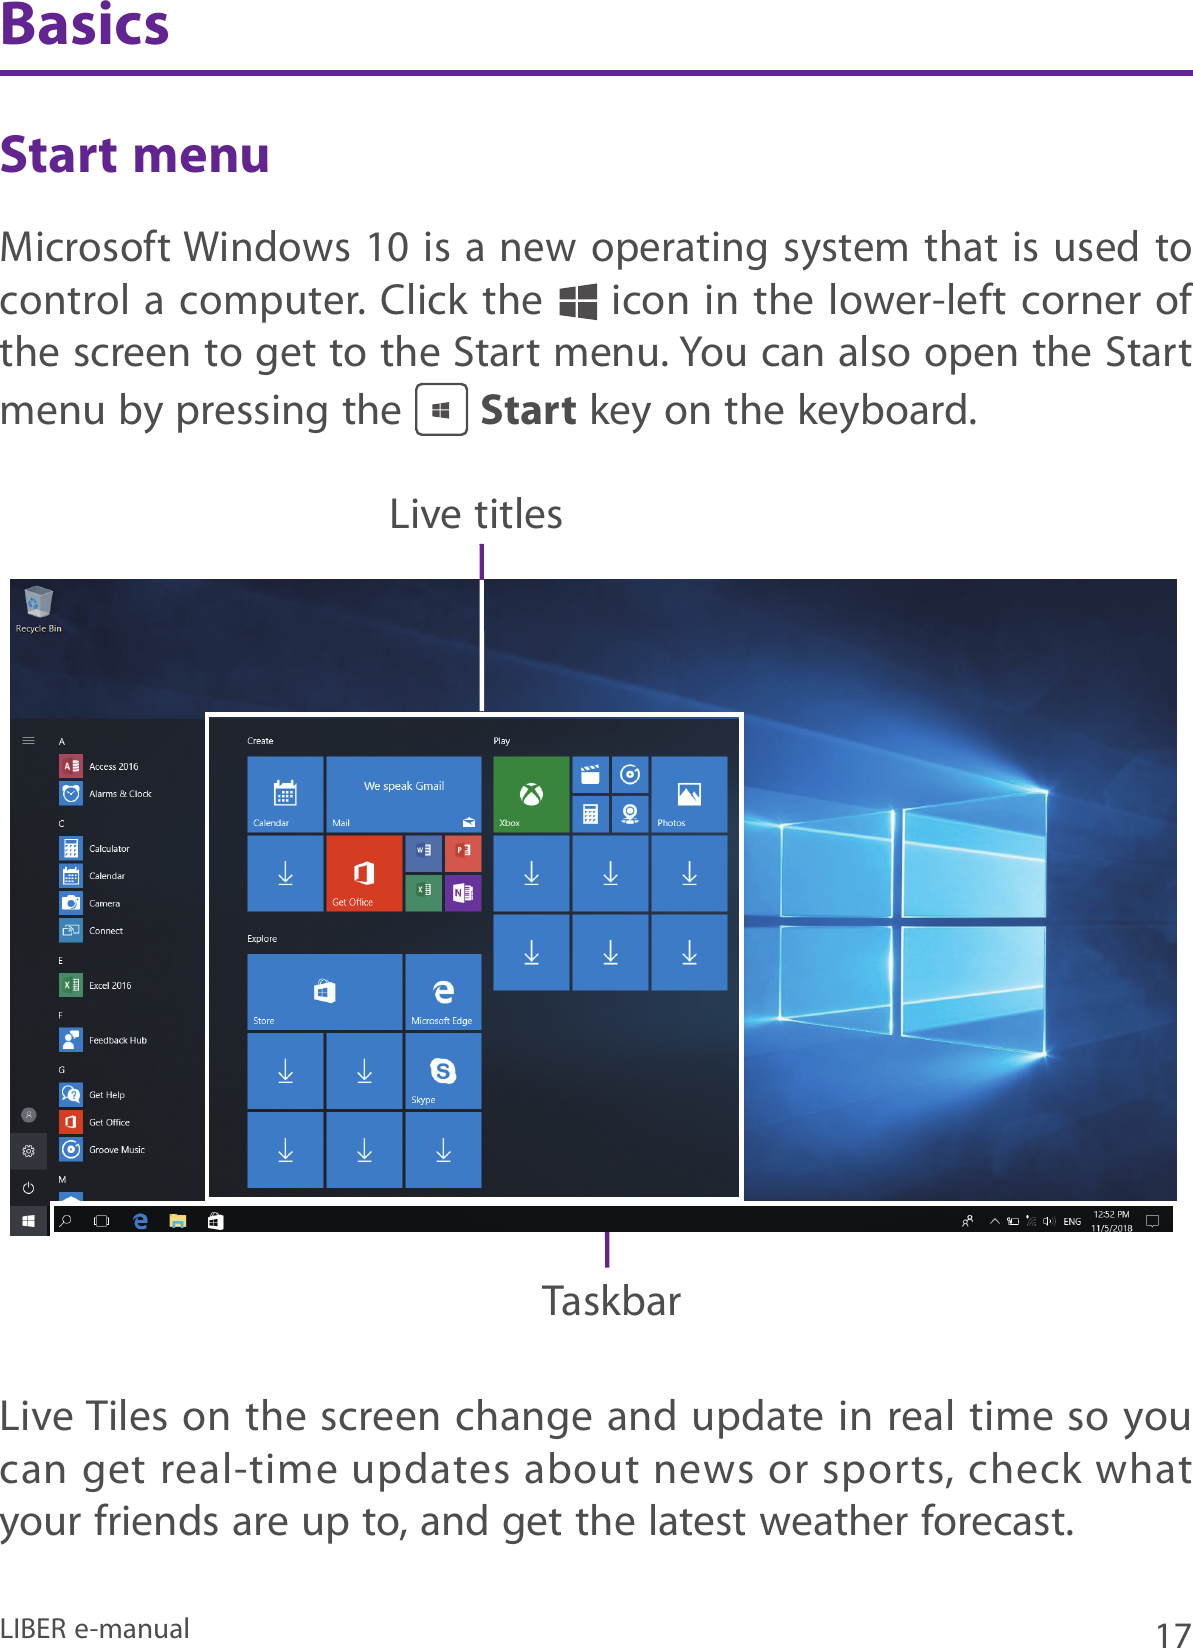 17LIBER e-manualStart menuMicrosoft Windows 10 is a  new operating system that is used to control a computer. Click the   icon in the lower-left corner of the screen to get to the Start menu. You can also open the Start menu by pressing the   Start key on the keyboard.Live titlesTaskbarBasicsLive Tiles on the screen change and update in real time so you can get real-time updates about news or sports, check what your friends are up to, and get the latest weather forecast. 